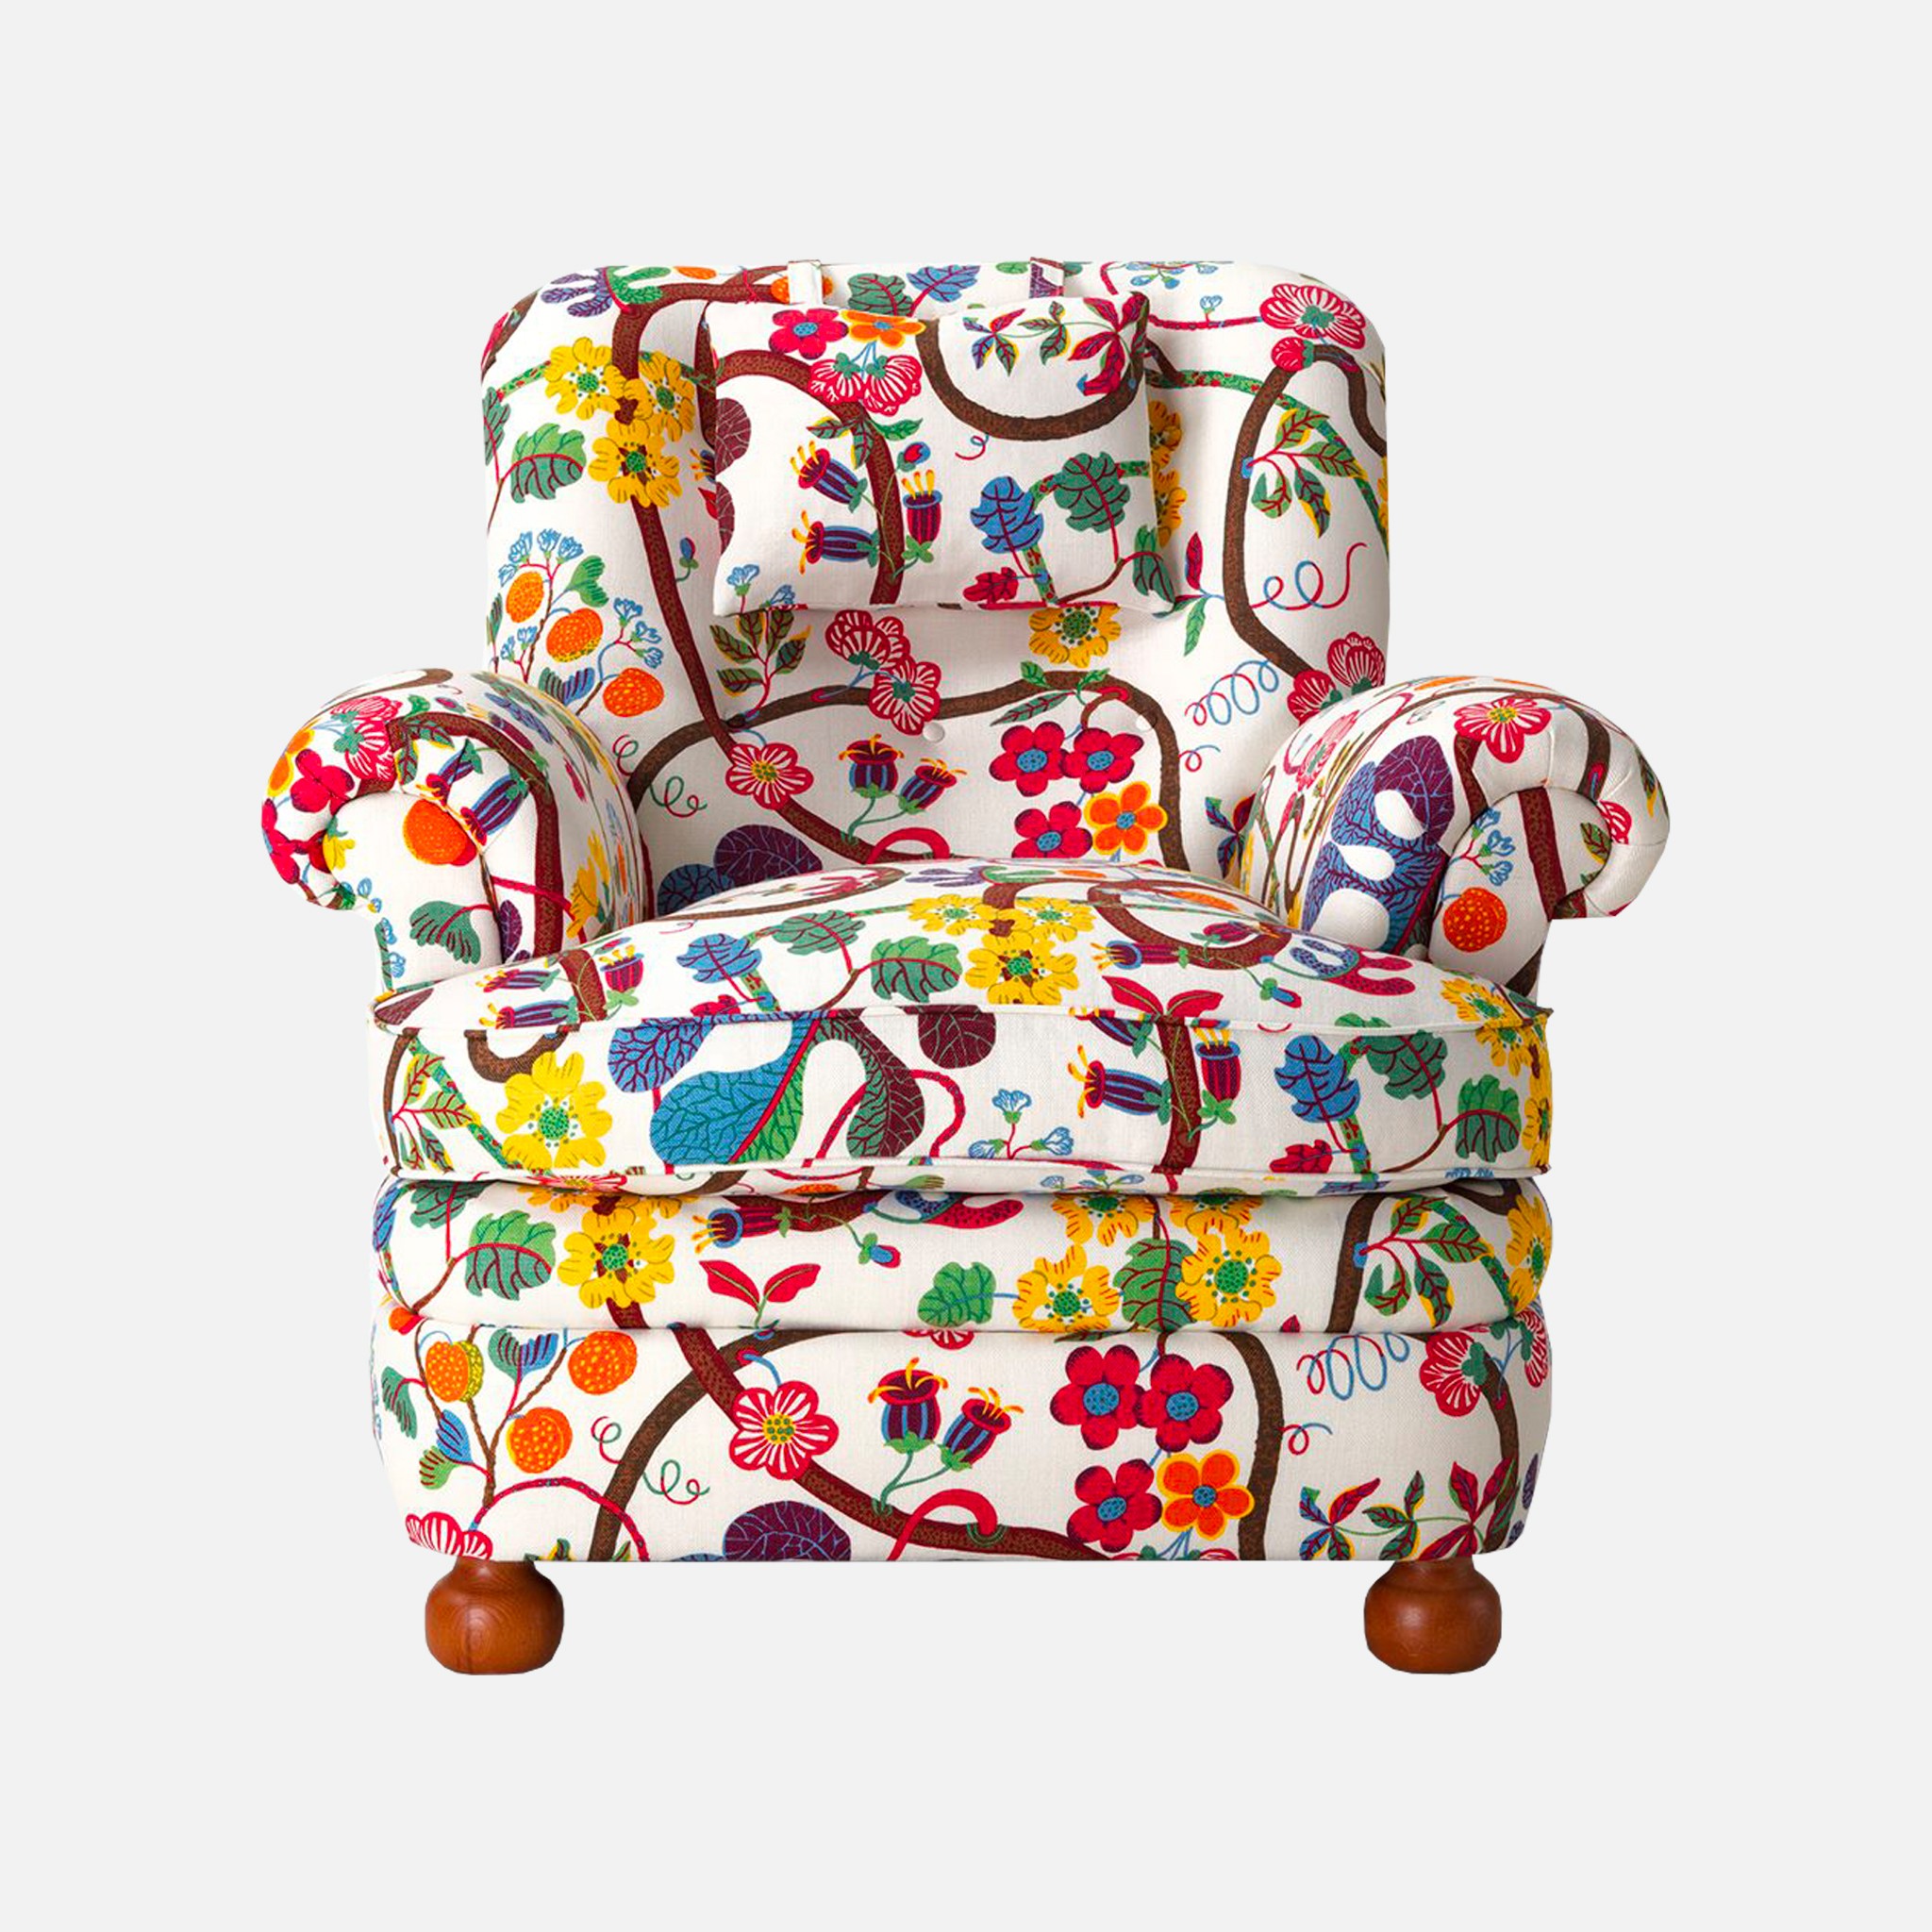 The image of an Josef Frank Armchair 336 product